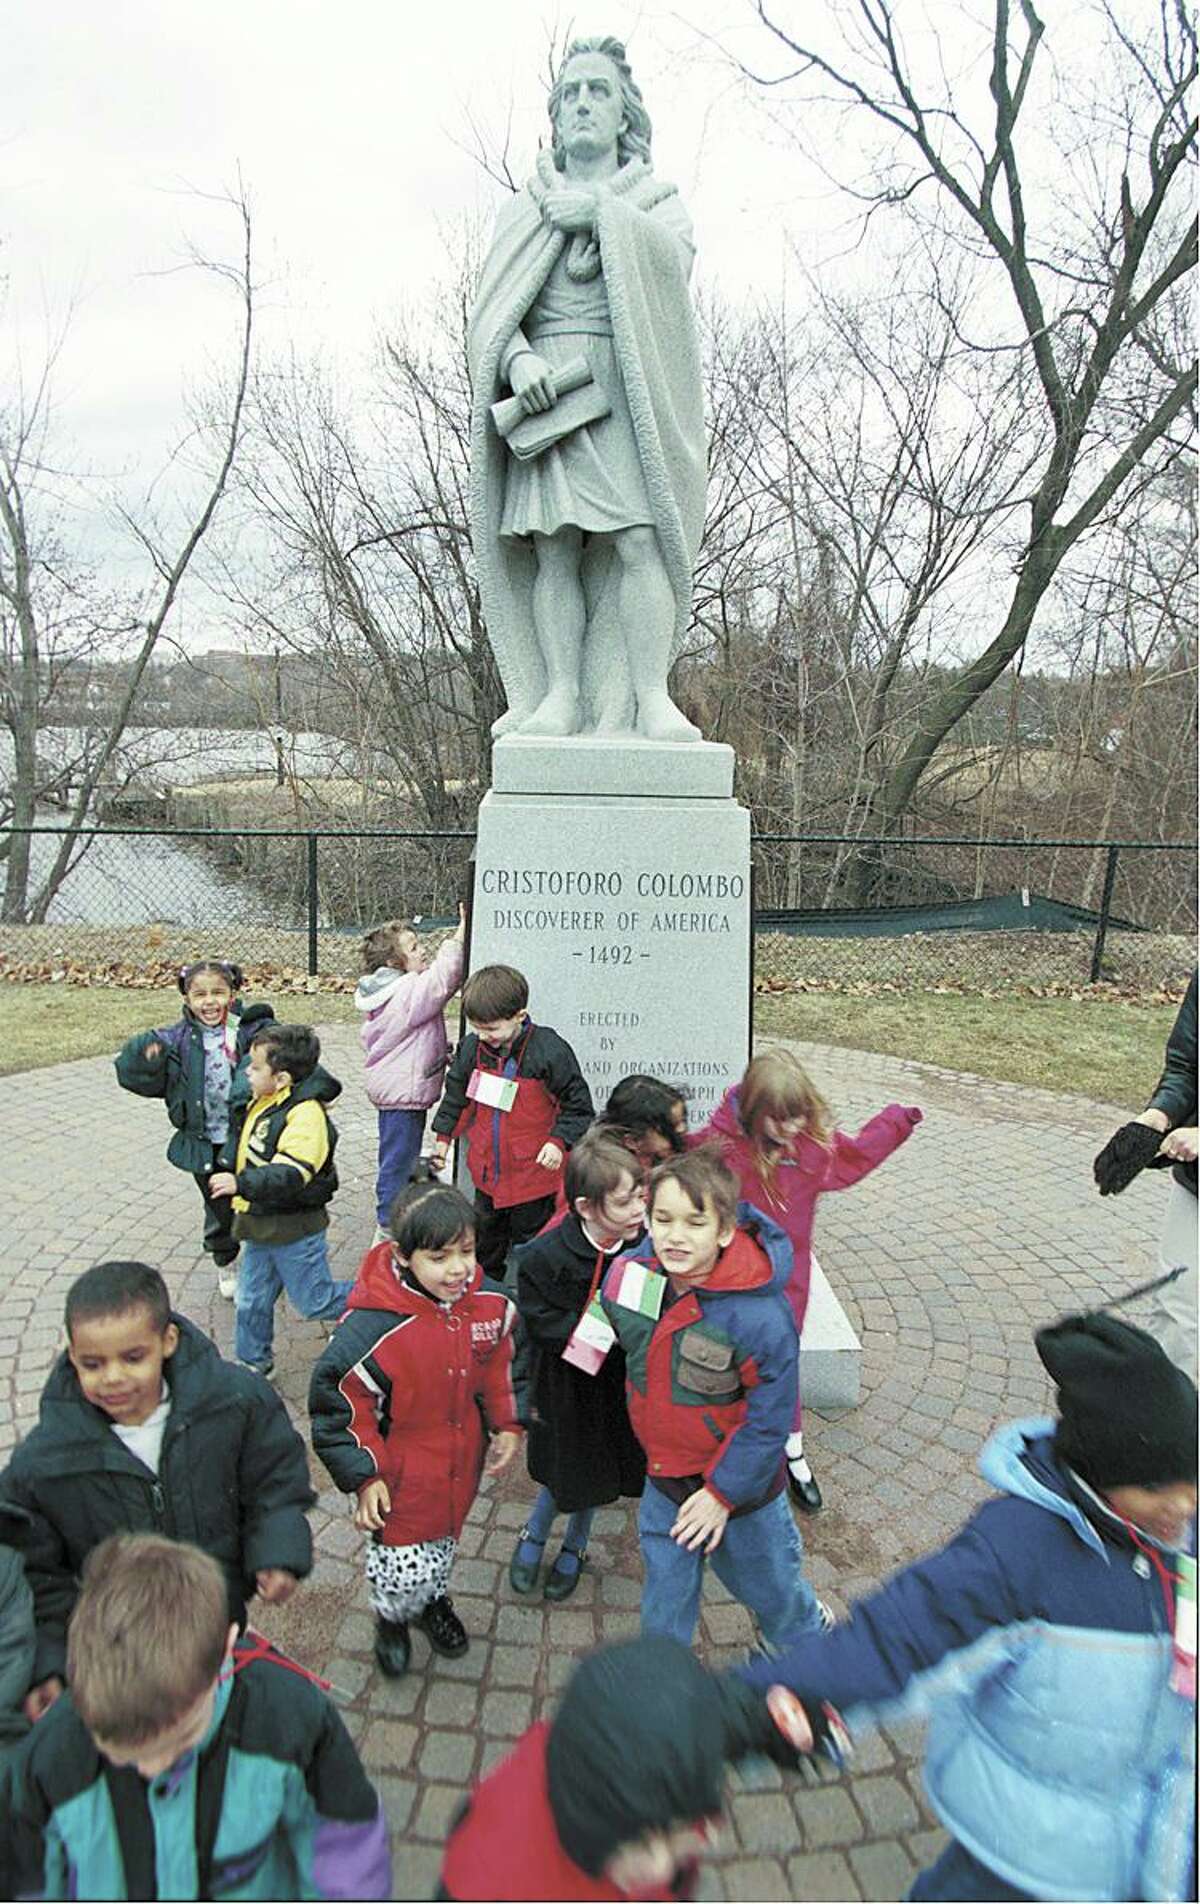 McDonough Elementary School Kindergartners from Angela Spaman's class visit the Christopher Columbus statue at Harbor Park during their field trip of Italian cultural sites in Middletown in 2001. On Saturday, June 13, 2020 it was removed.